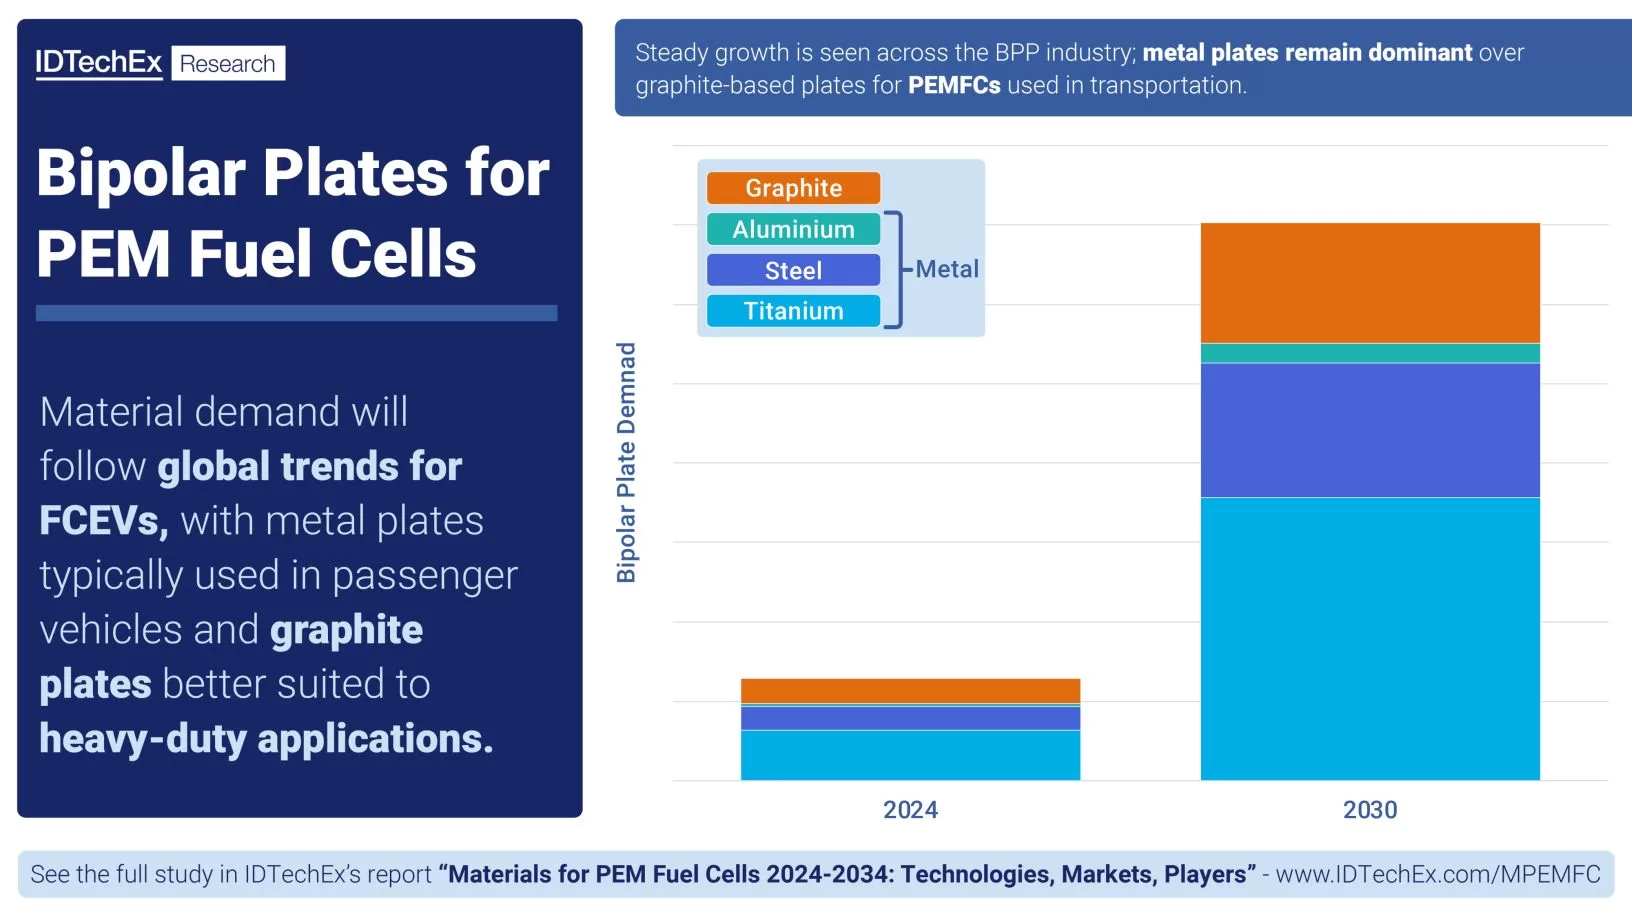 Bipolar Plates for PEM Fuel Cells. Source IDTechEx.jpg